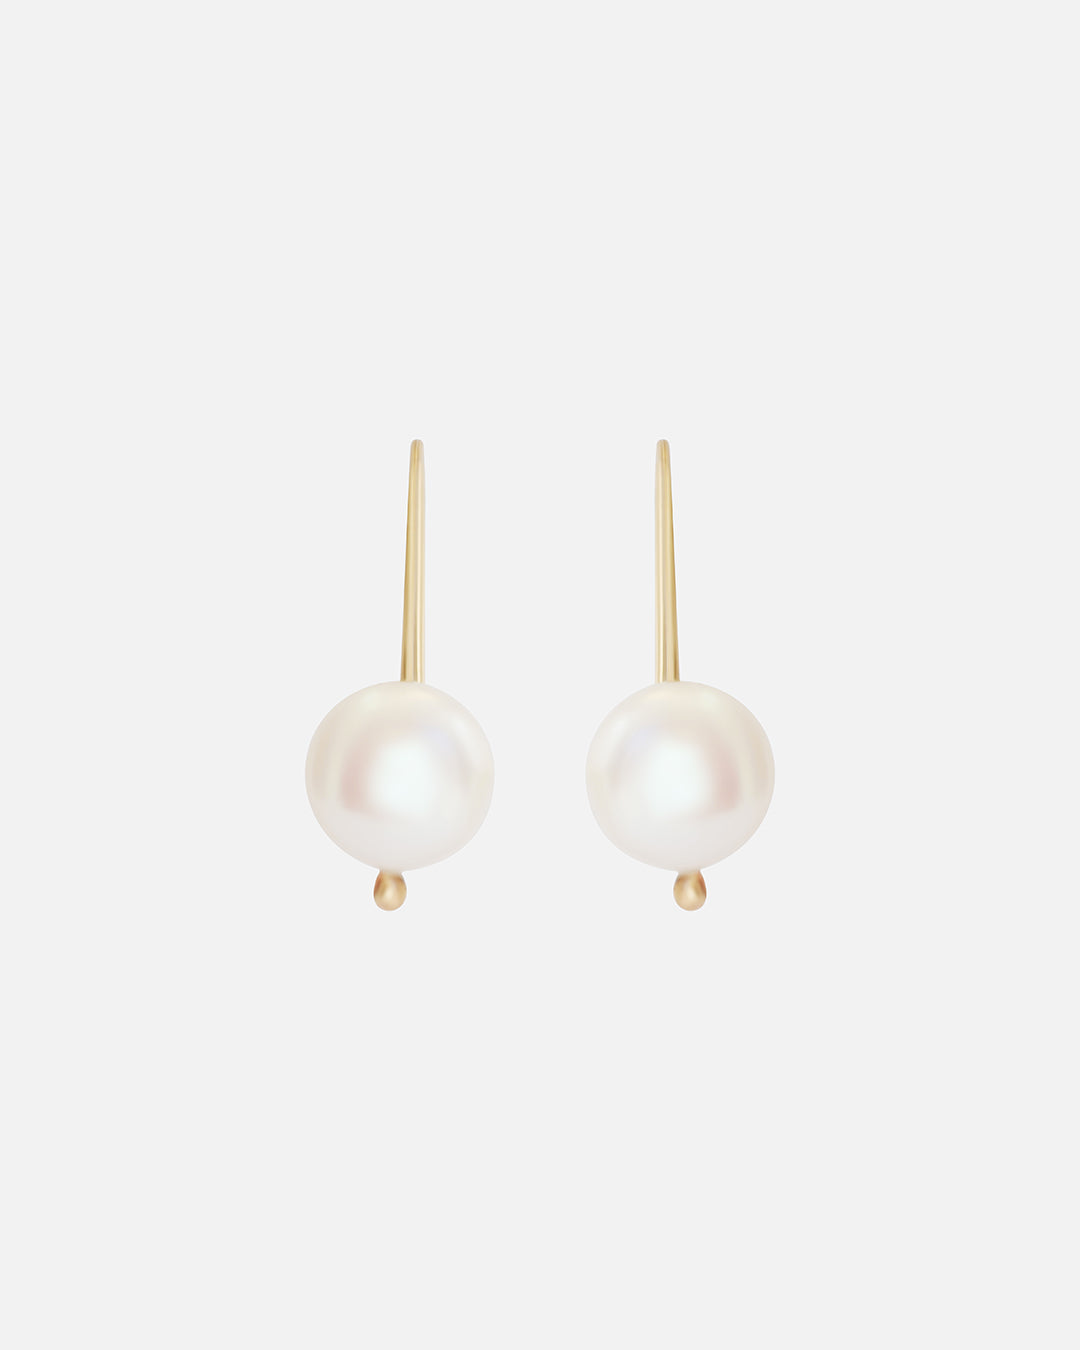 Mother of Pearl / Round Earrings By Tricia Kirkland in earrings Category